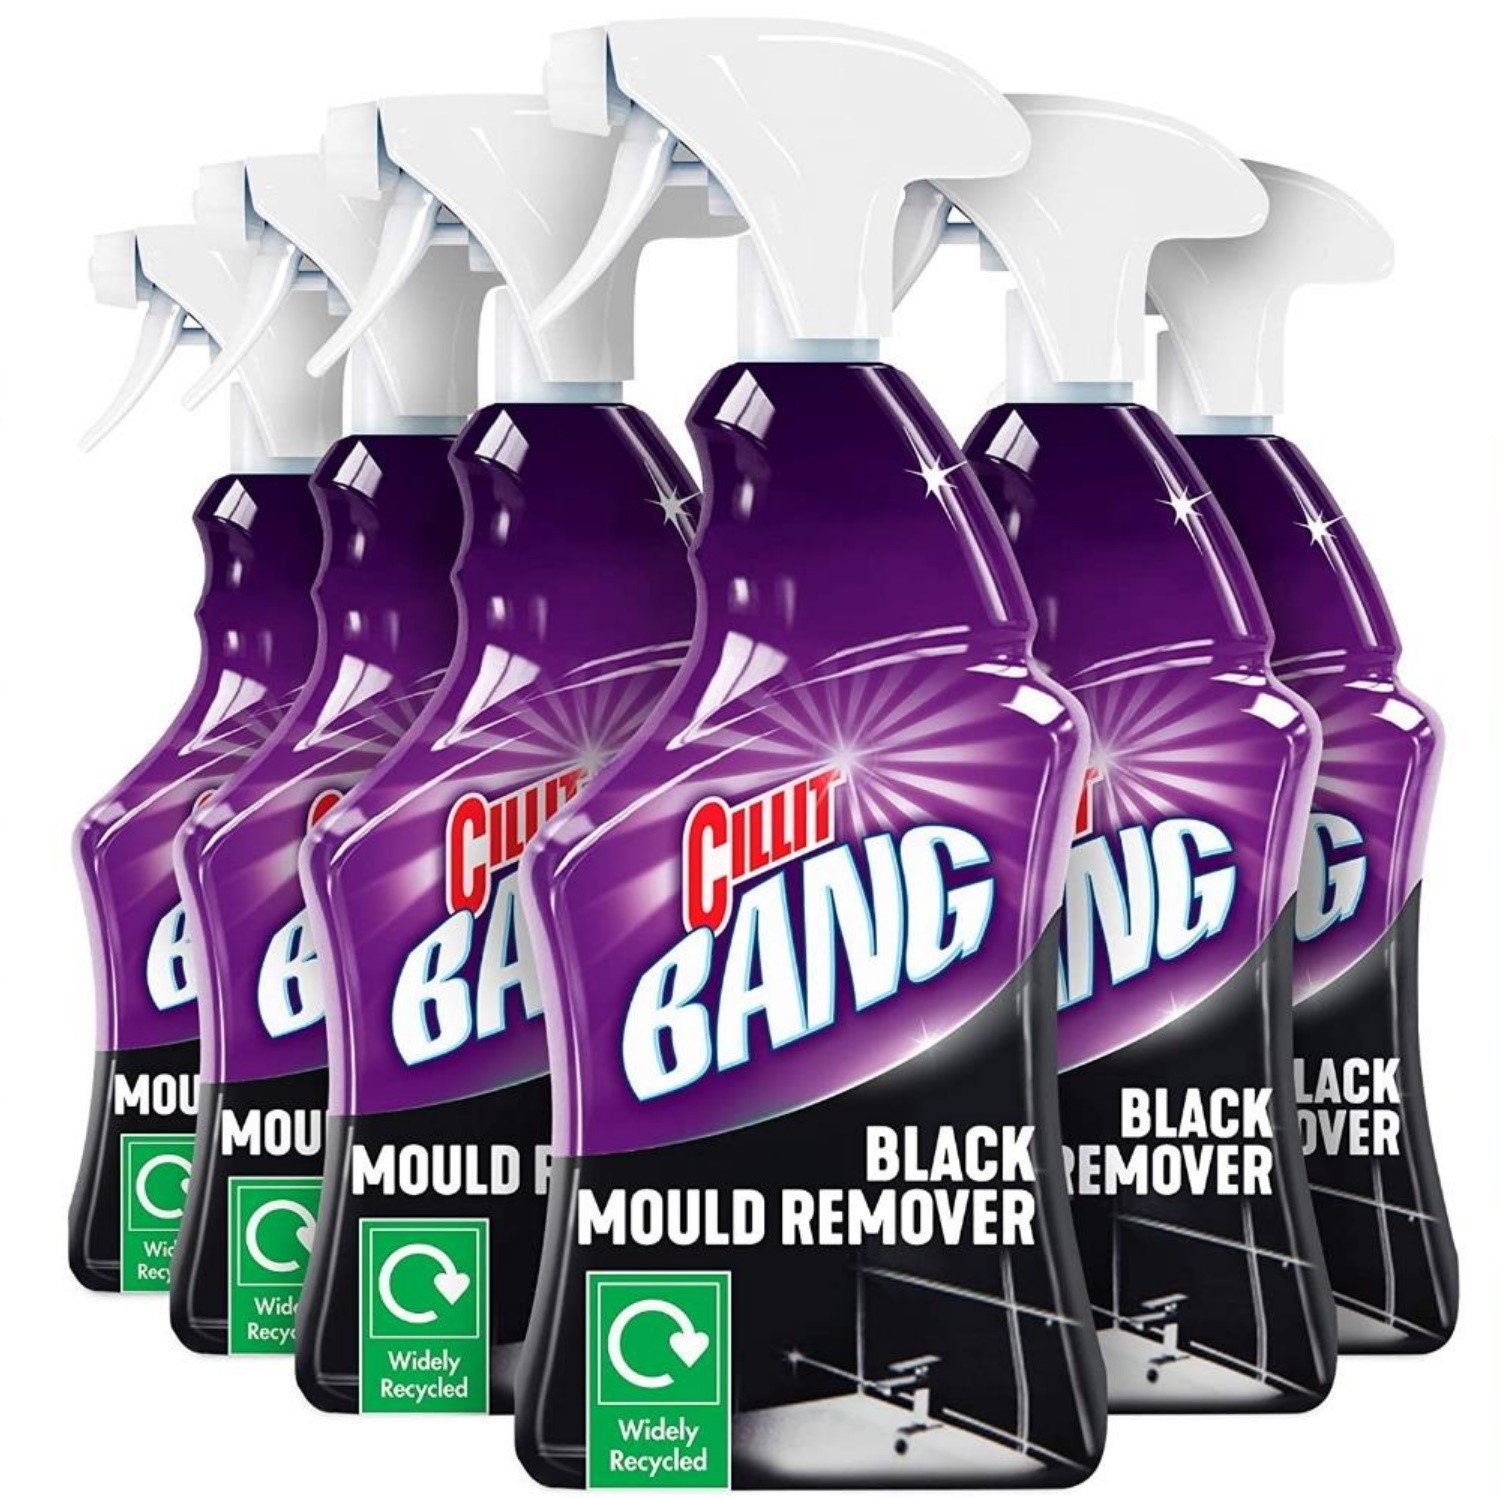 3 x Cillit Bang Power Cleaner Black Mould Remover Spray 750ml